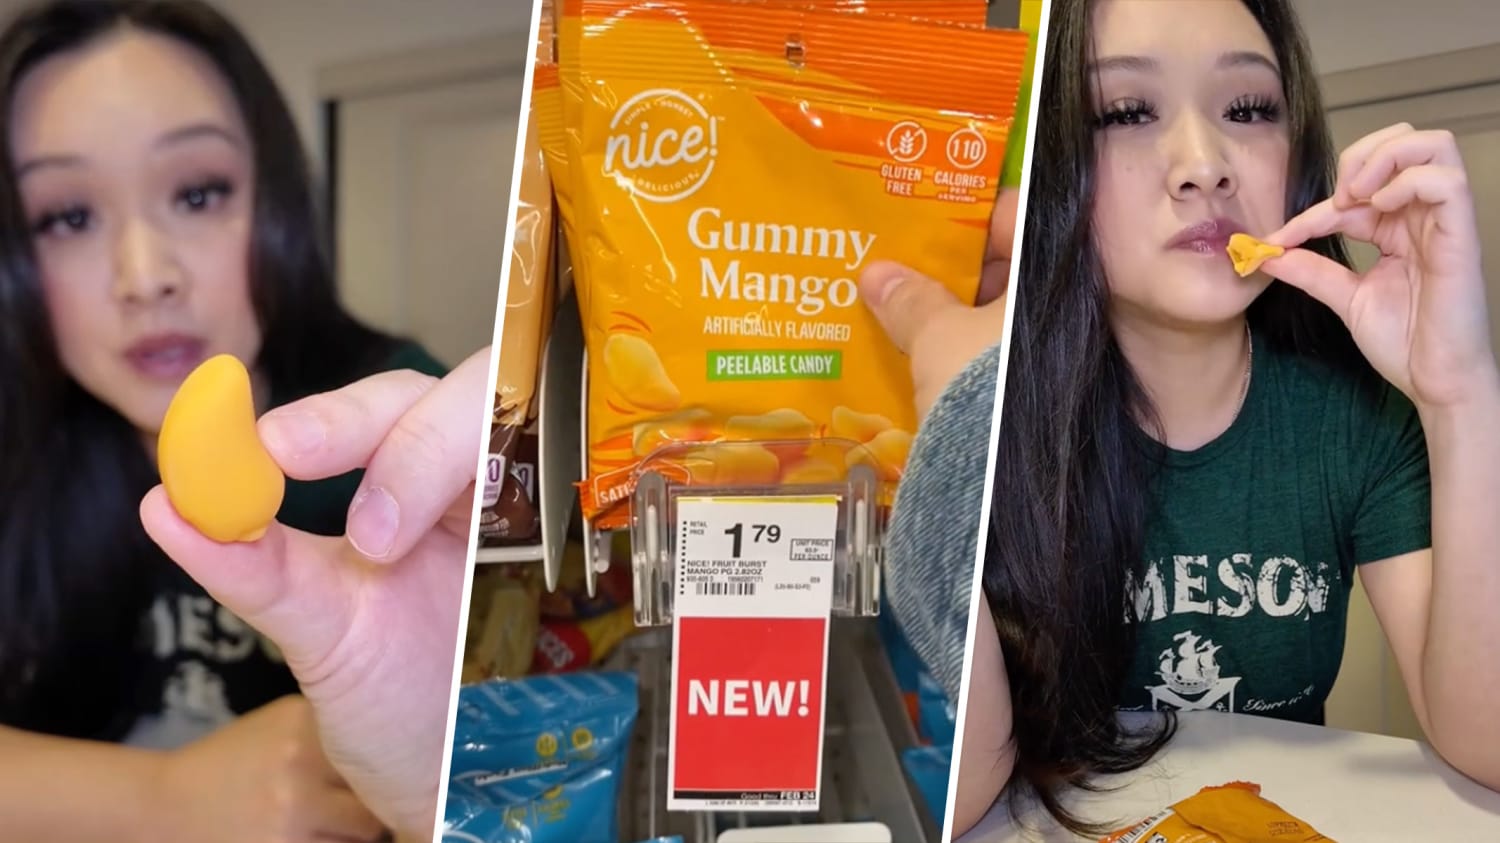 TikTok Craze Makes Walgreens Mango Gummies Sell Out: What's All the Hype About?